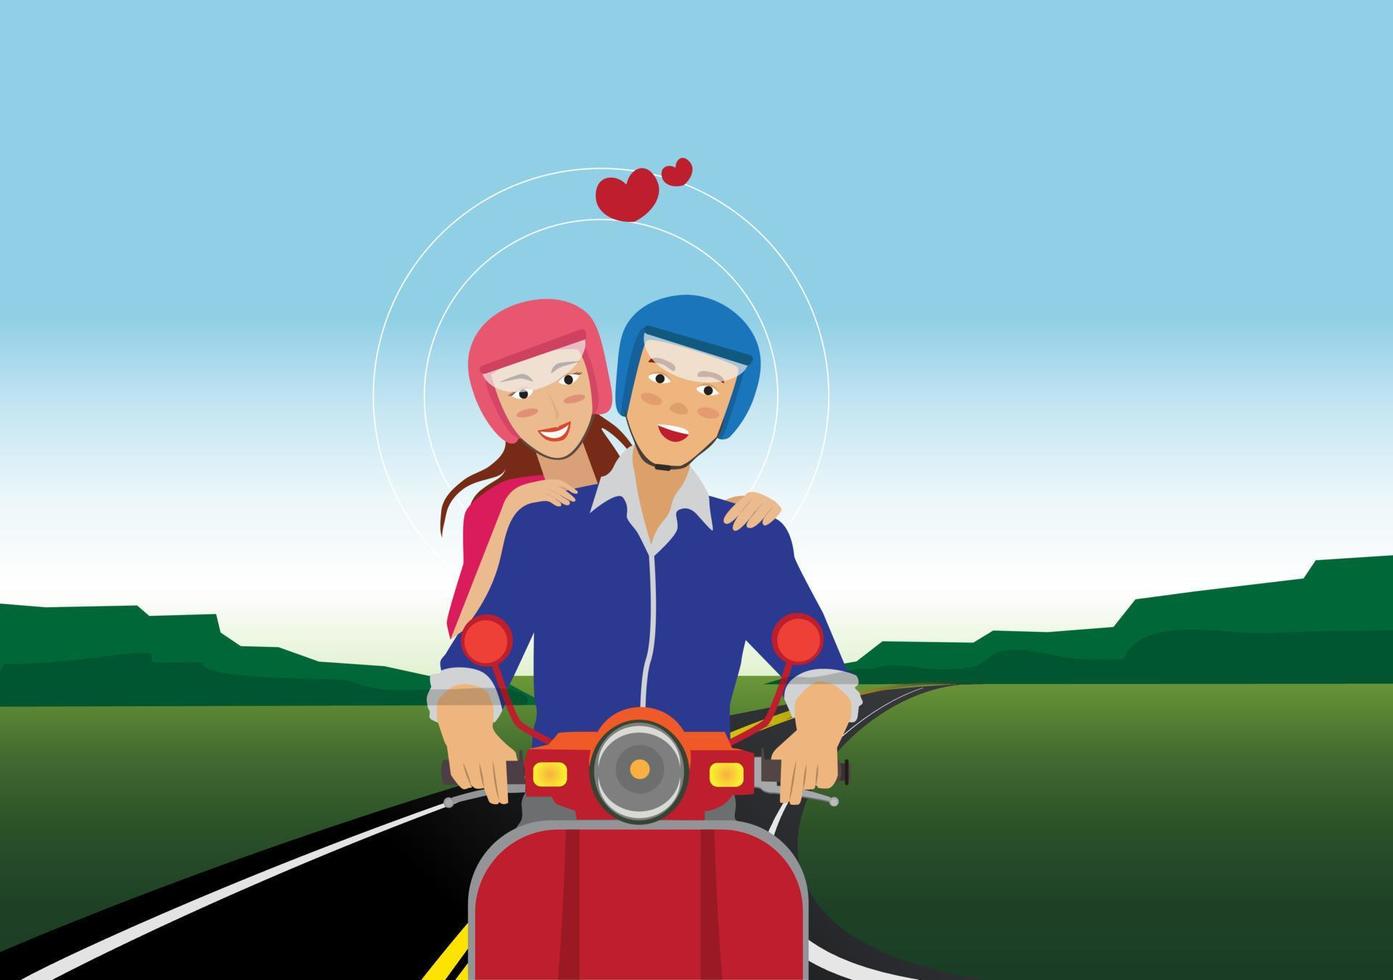 couple wearing helmets riding a motorcycle in summer vector illustration